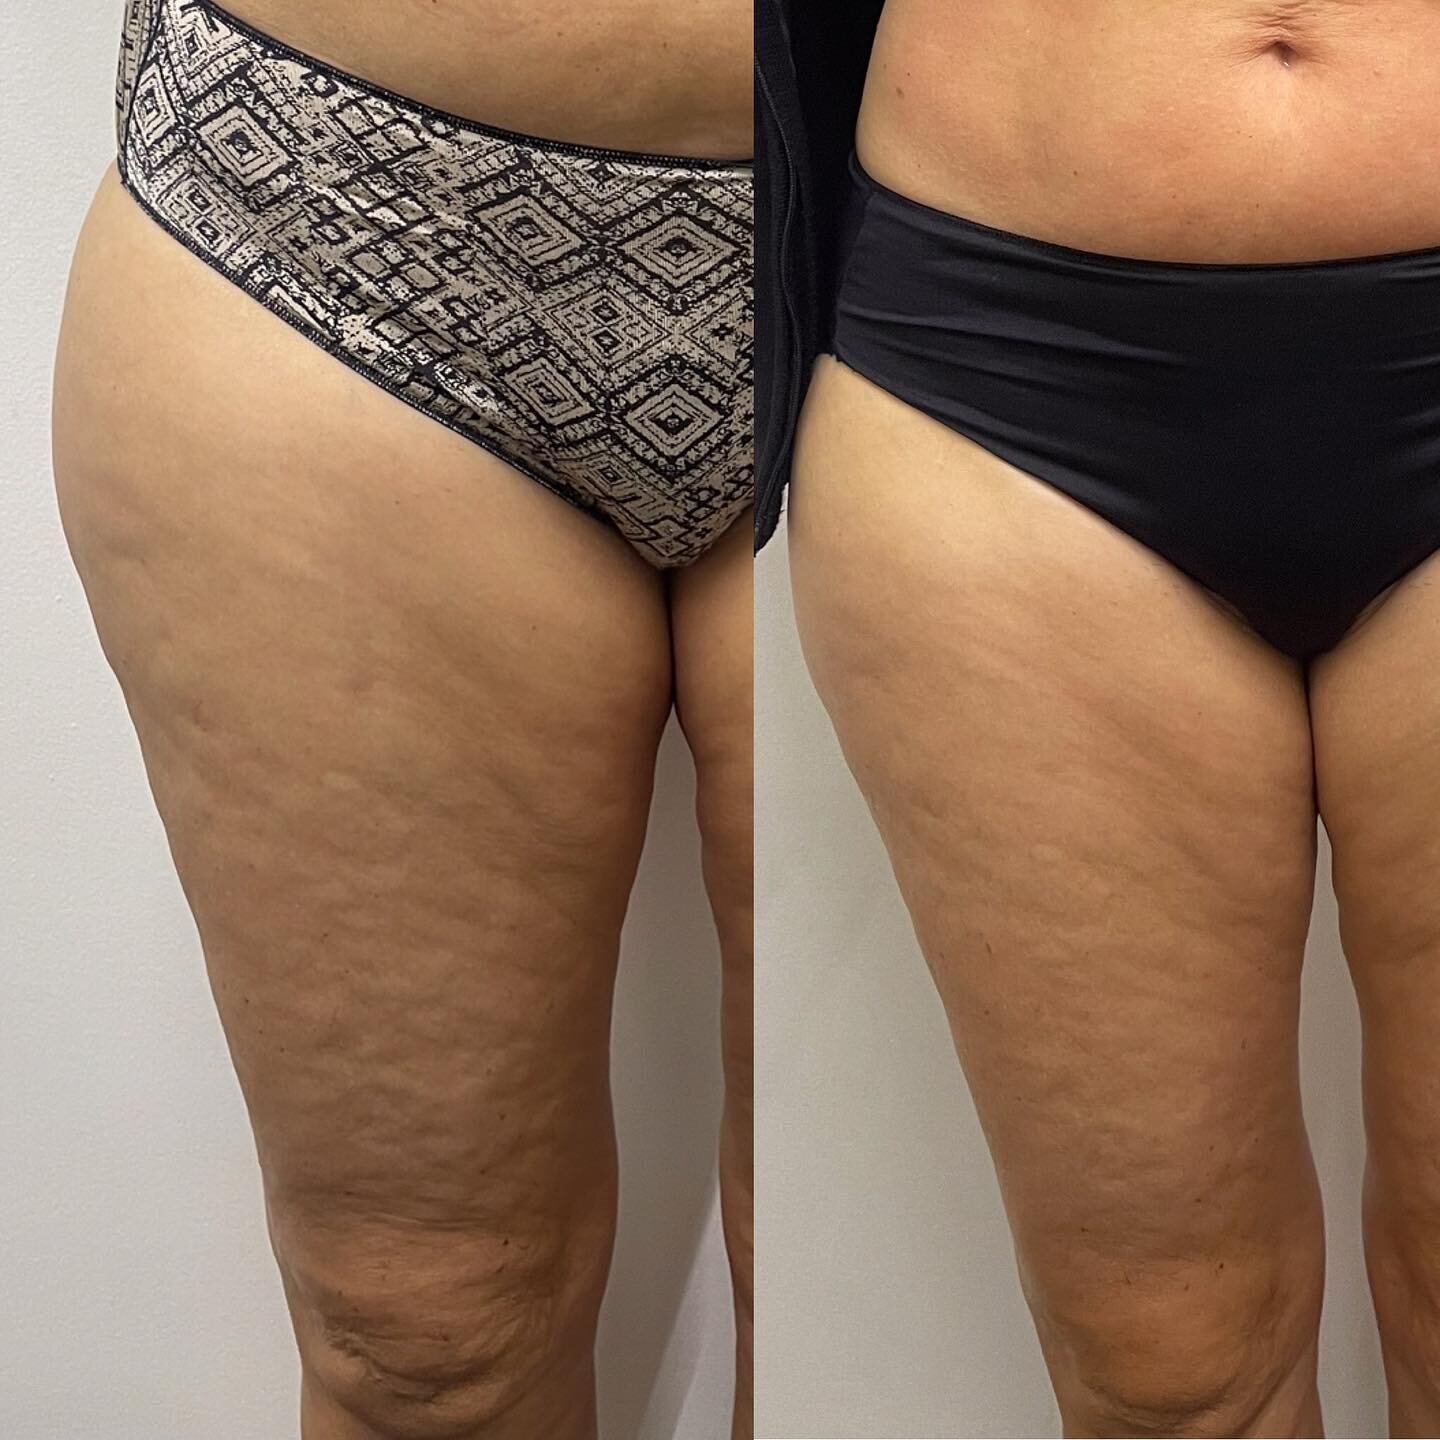 Skin Tightening &amp; Body Contouring results 😍 smoothing out the cellulite in 10 sessions &amp; will continue to improve for 3 months after treatments! 
Book now and claim 40% OFF till the end of July 🤍🤍
&bull;
&bull;
&bull;
&bull;
#slimlux #glob